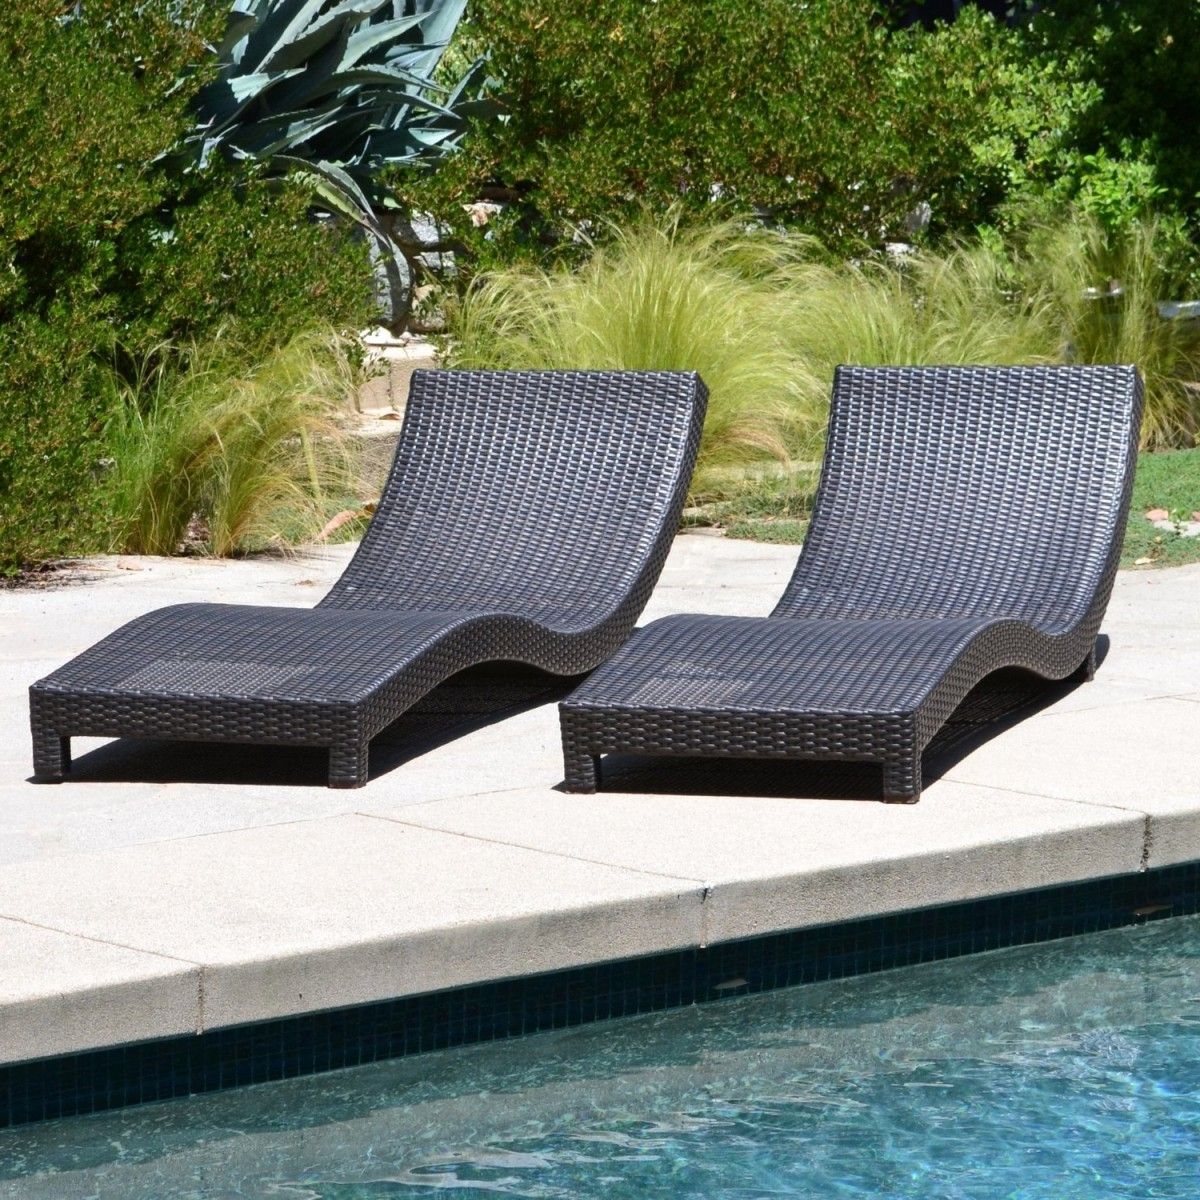 Modern Living Outdoor Chaise Lounge Chairs W/ Cushions With Favorite Modern Outdoor Chaise Lounge Chairs (View 13 of 15)